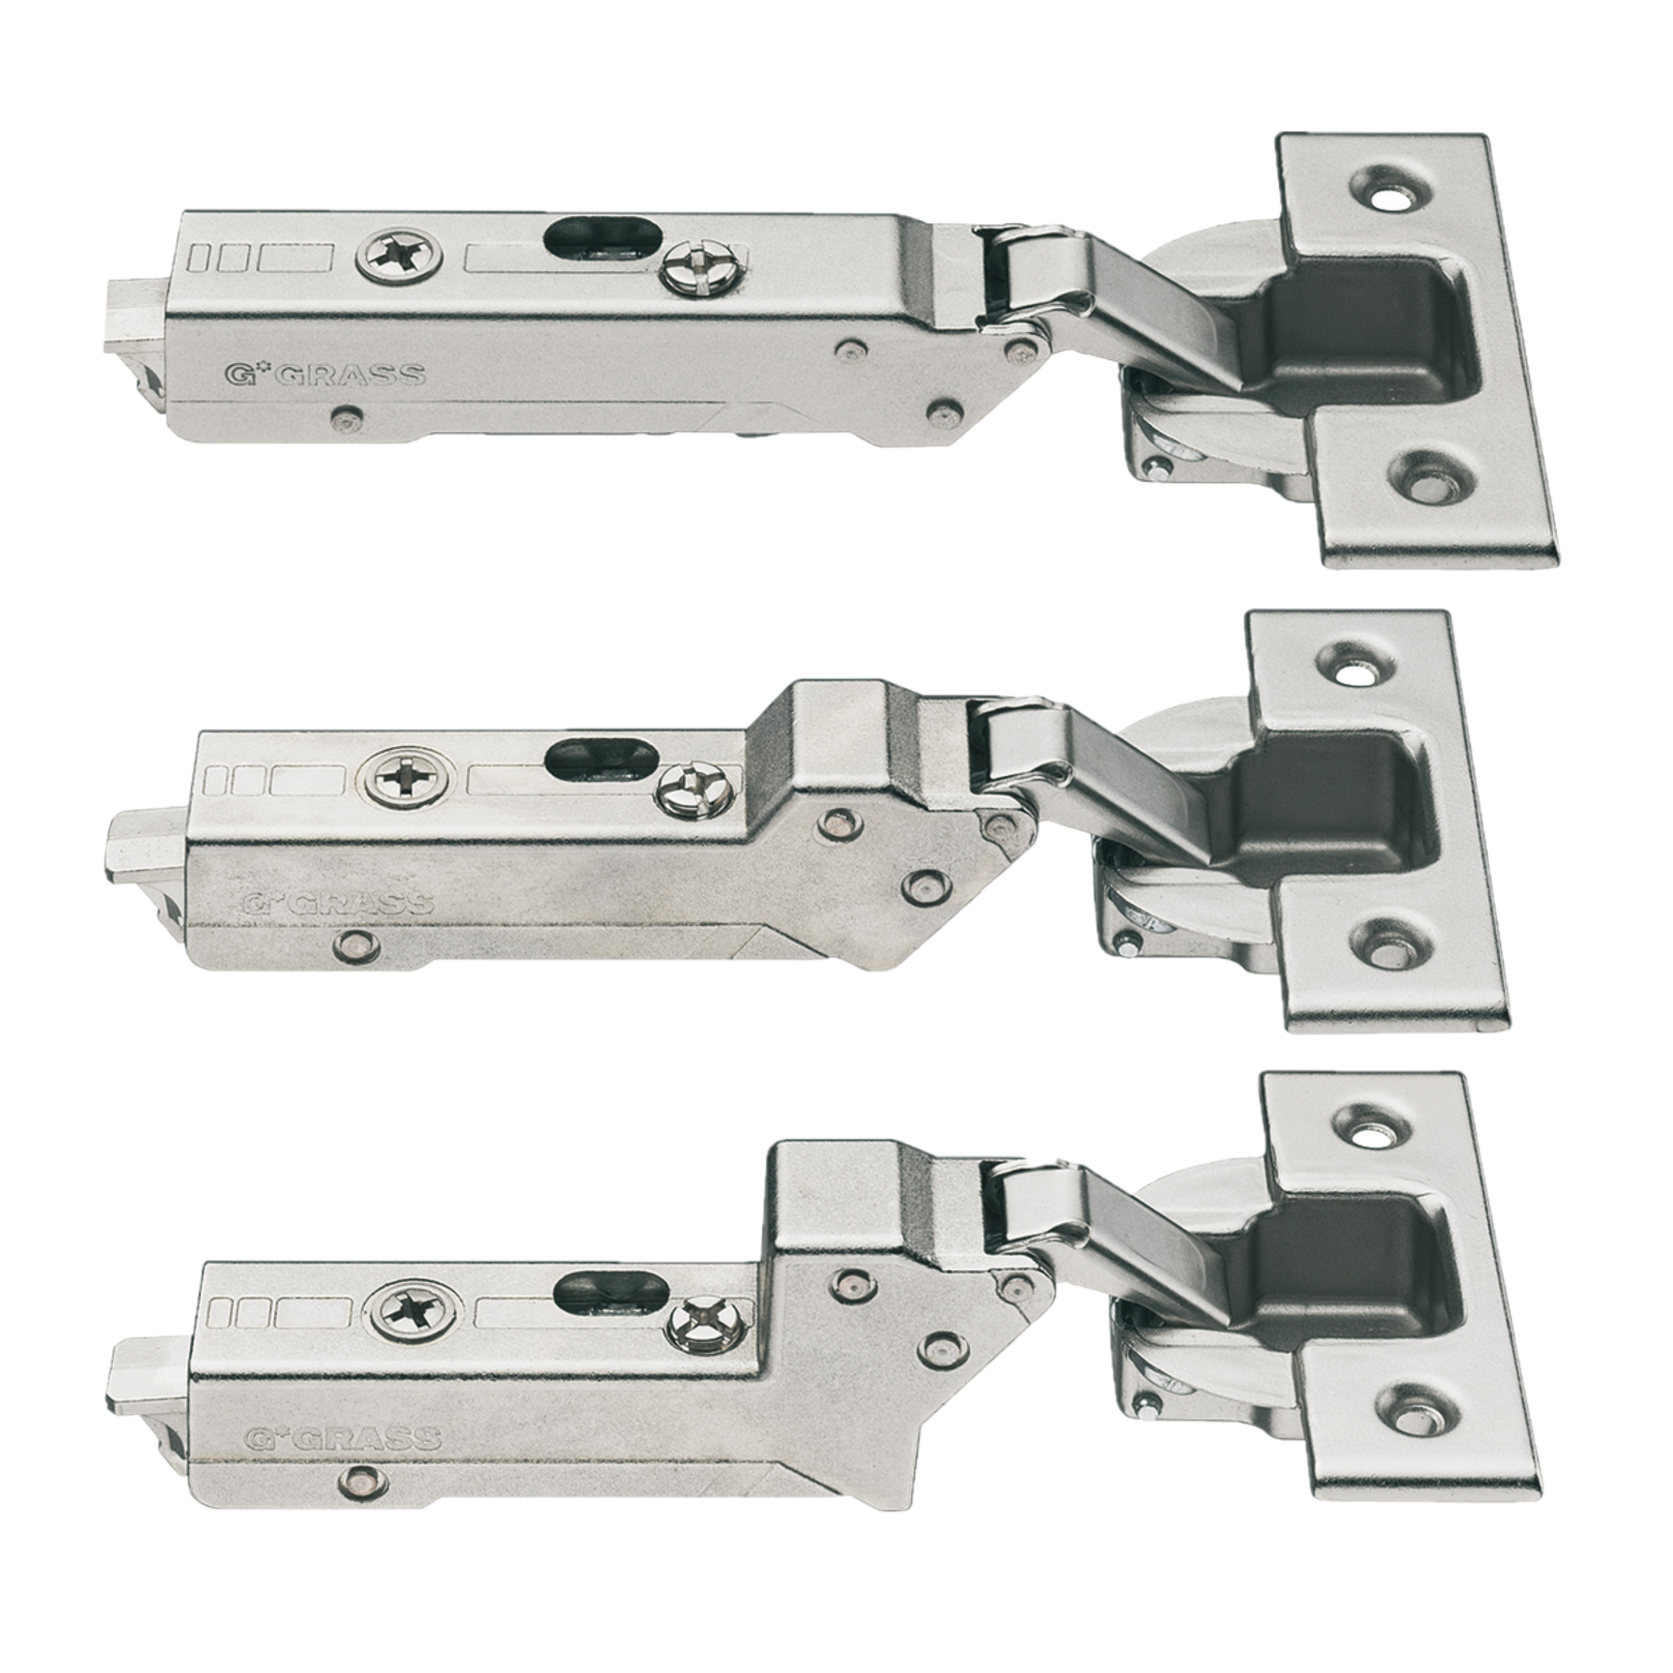 Single Small Utility Hinge Brass Plated 56mm x 13mm